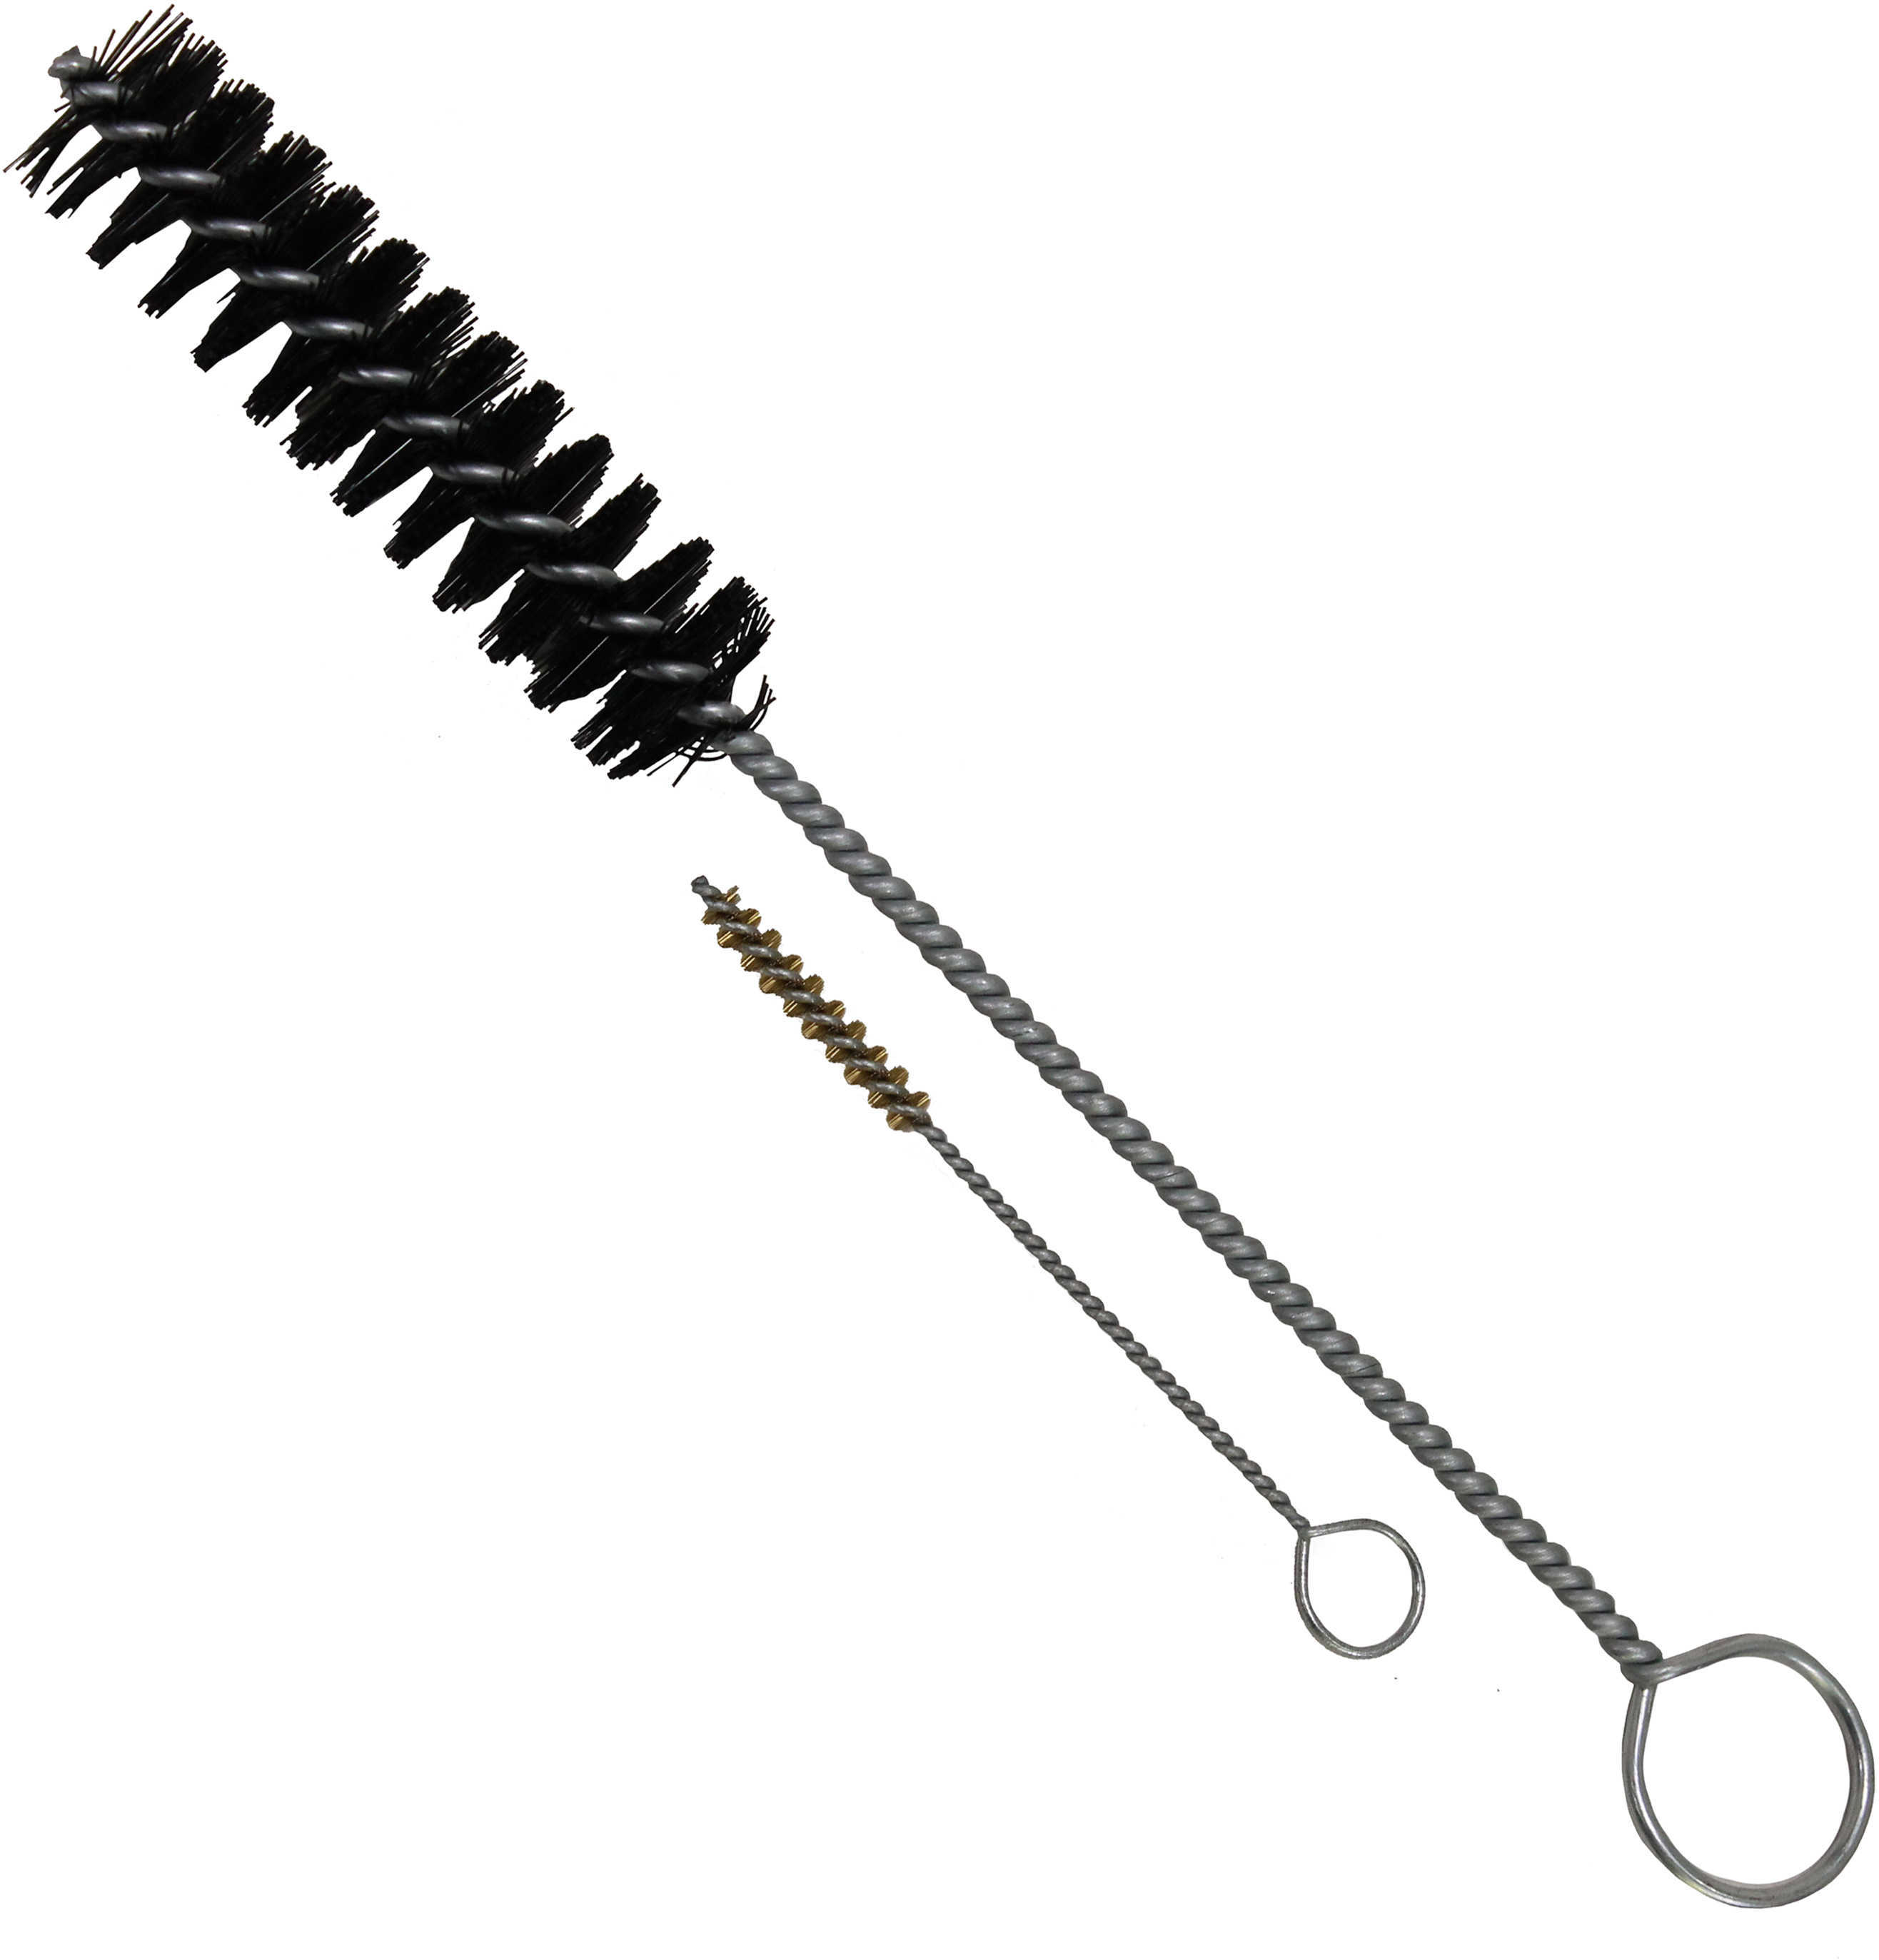 Thompson/Center Arms Center Accessories Strike Breech and Fire Channel Brush Md: 3005562